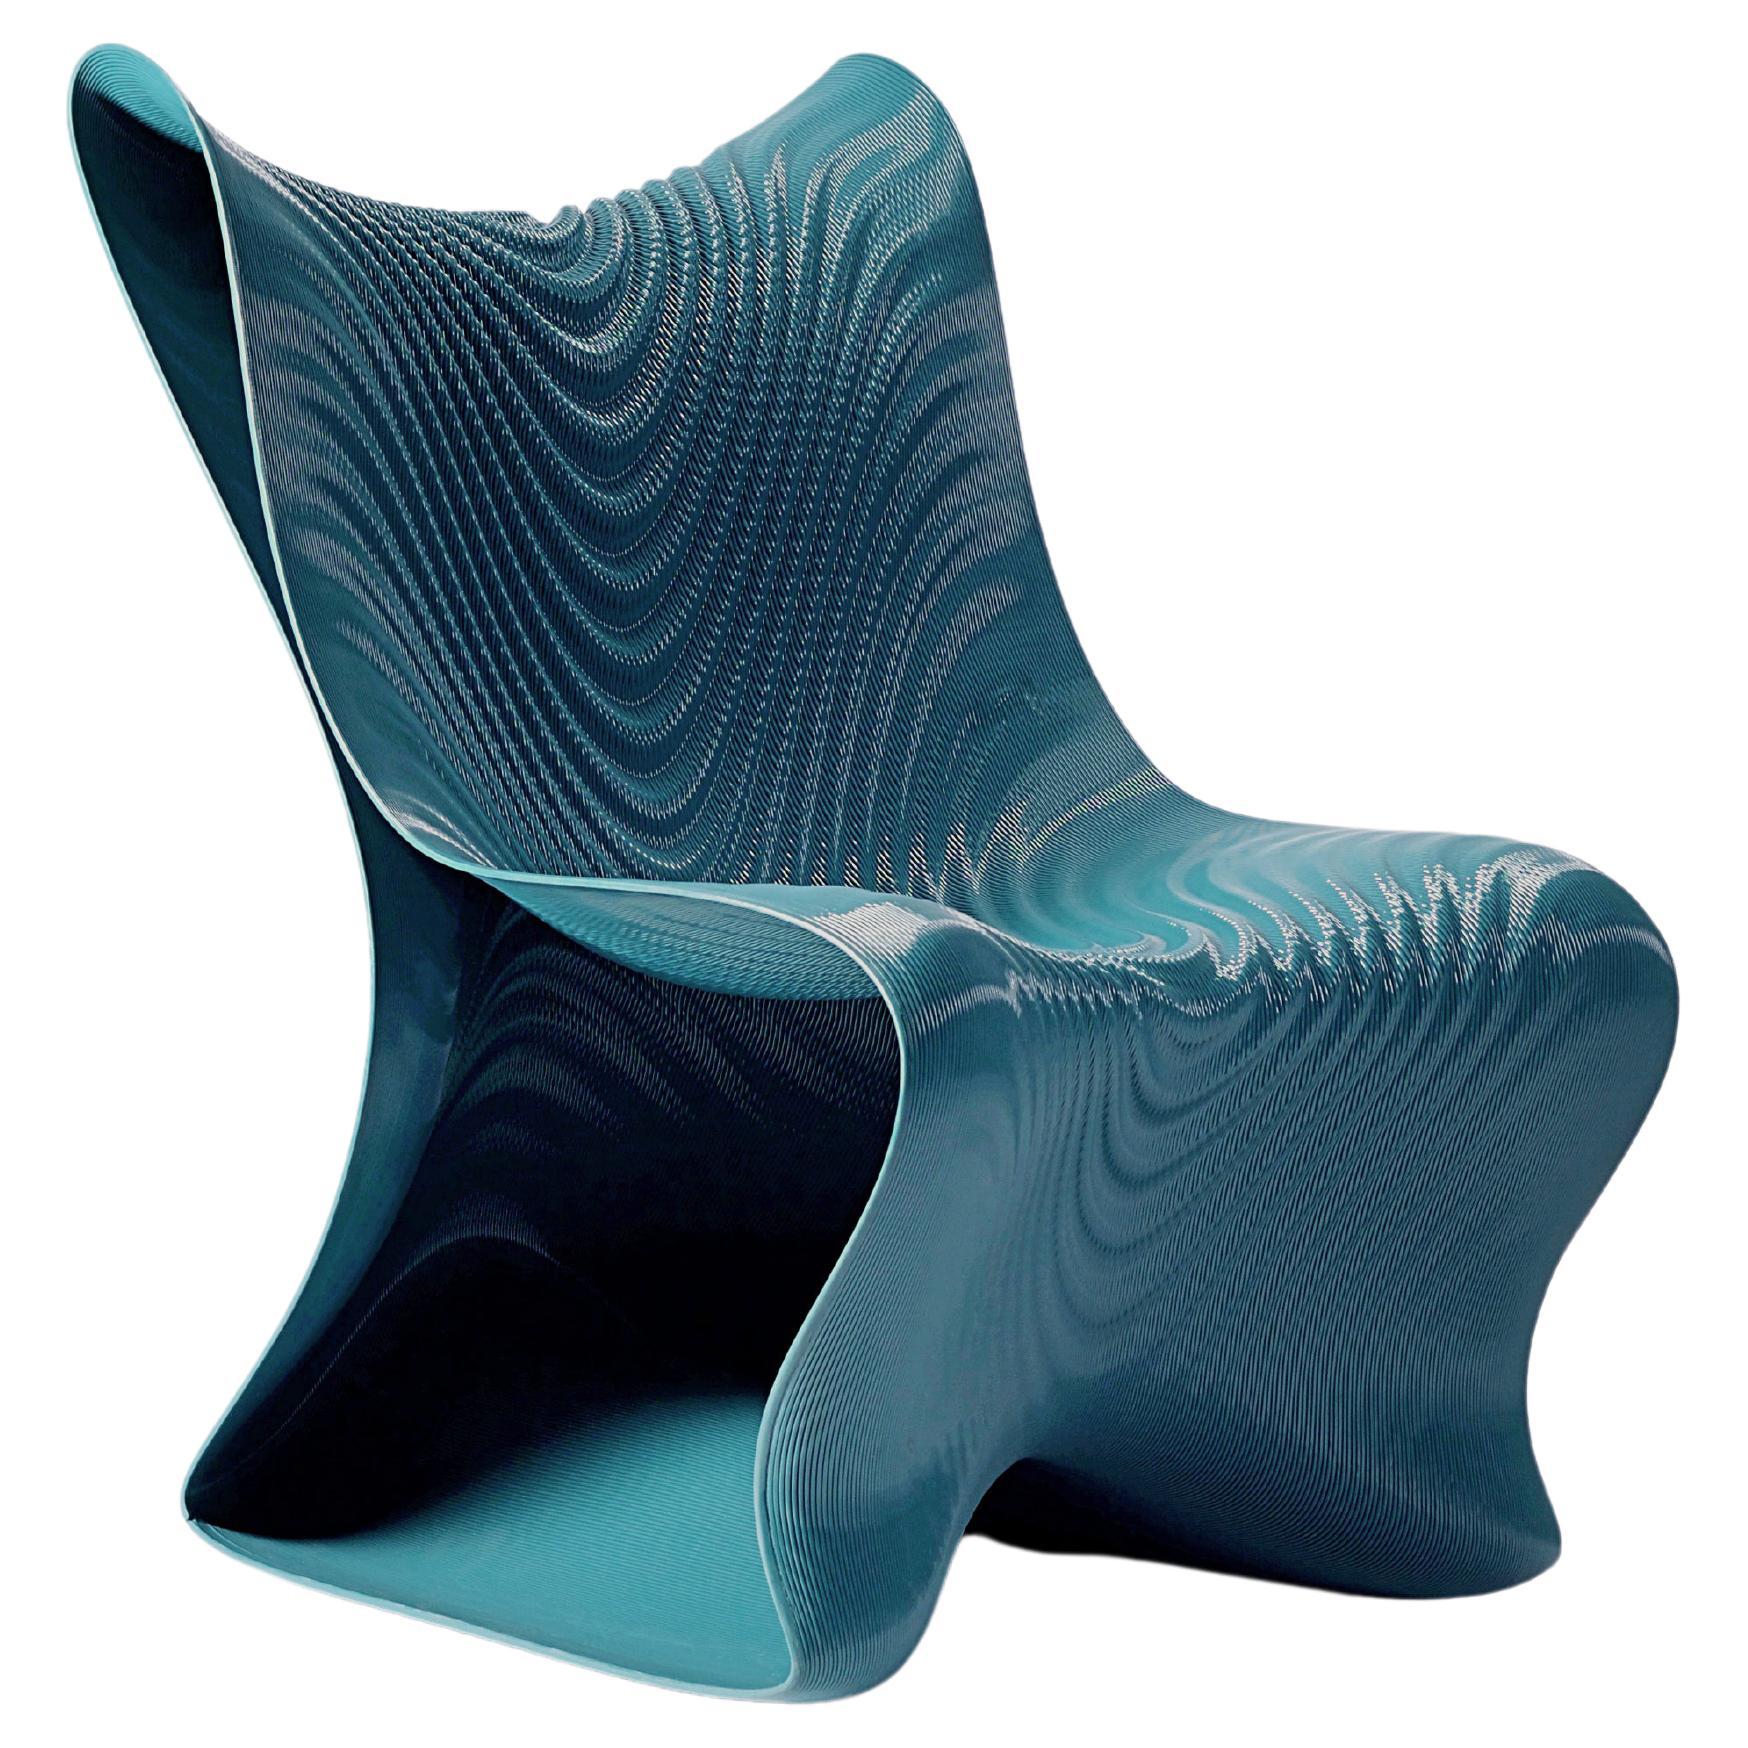 Modern by Mean for Nagami Dining Chair Turquoise 3D Printed Recycled Plastic For Sale